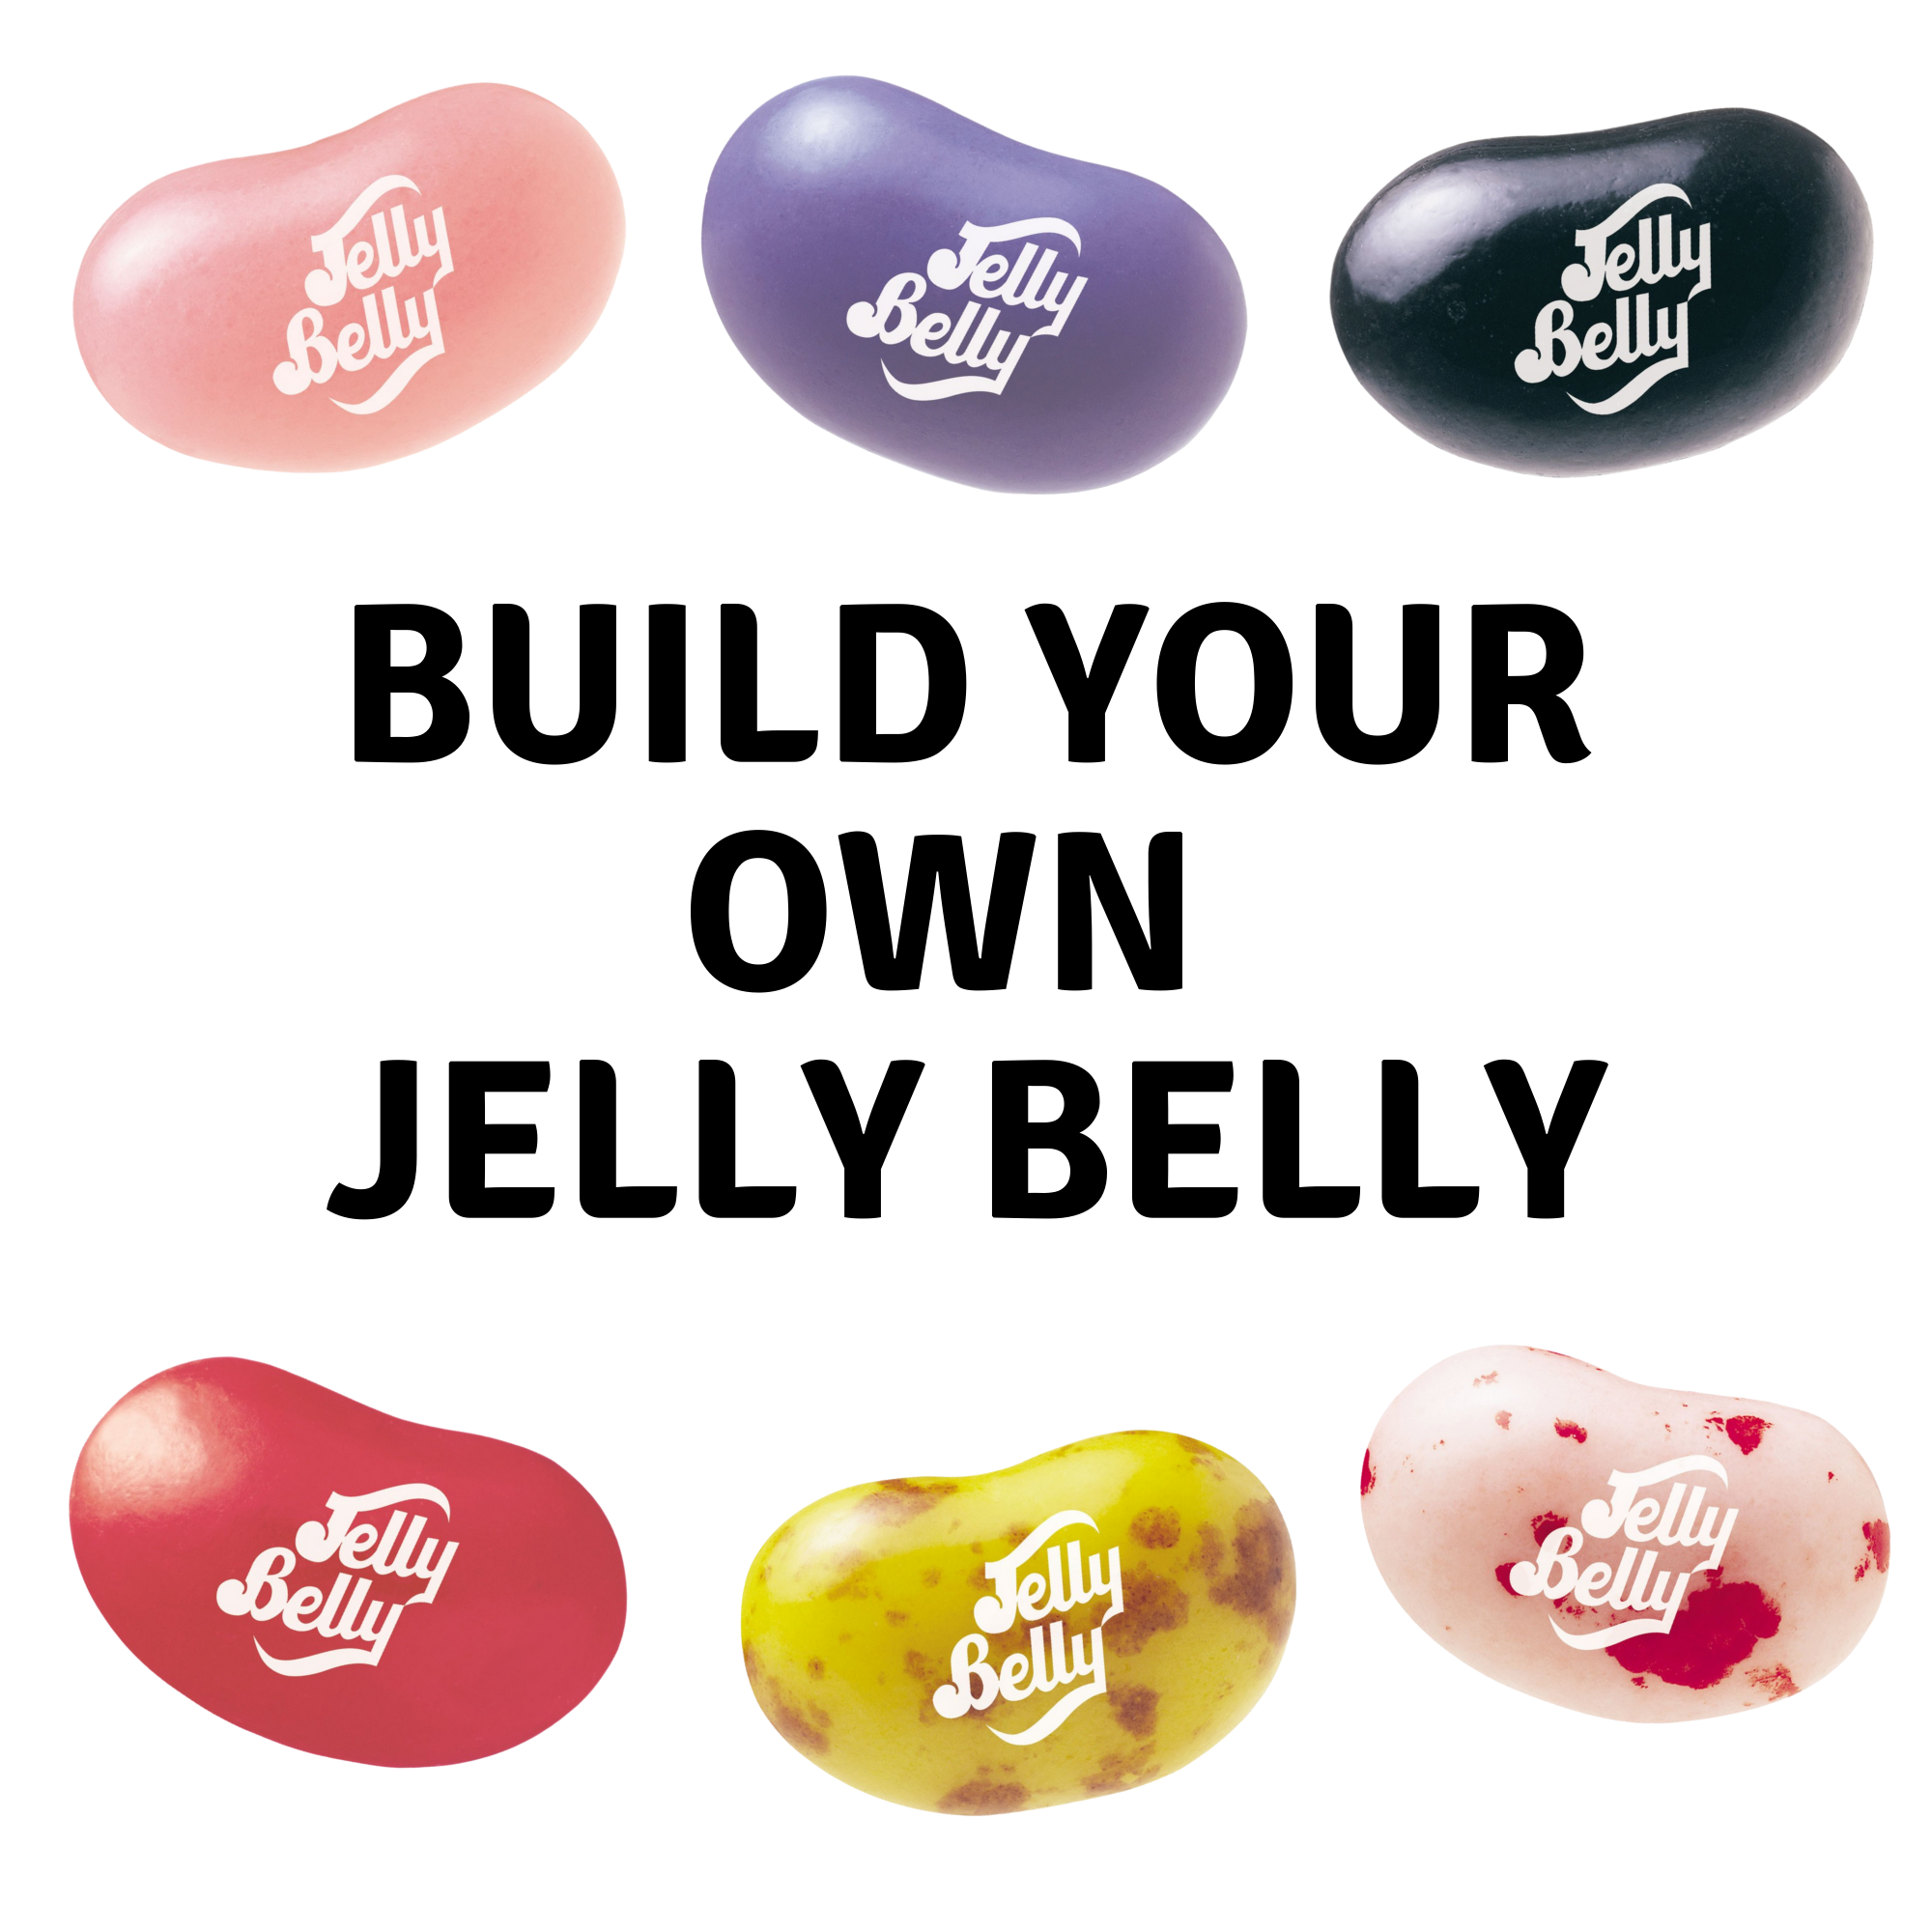 Jely Belly Bean Boozled Bag